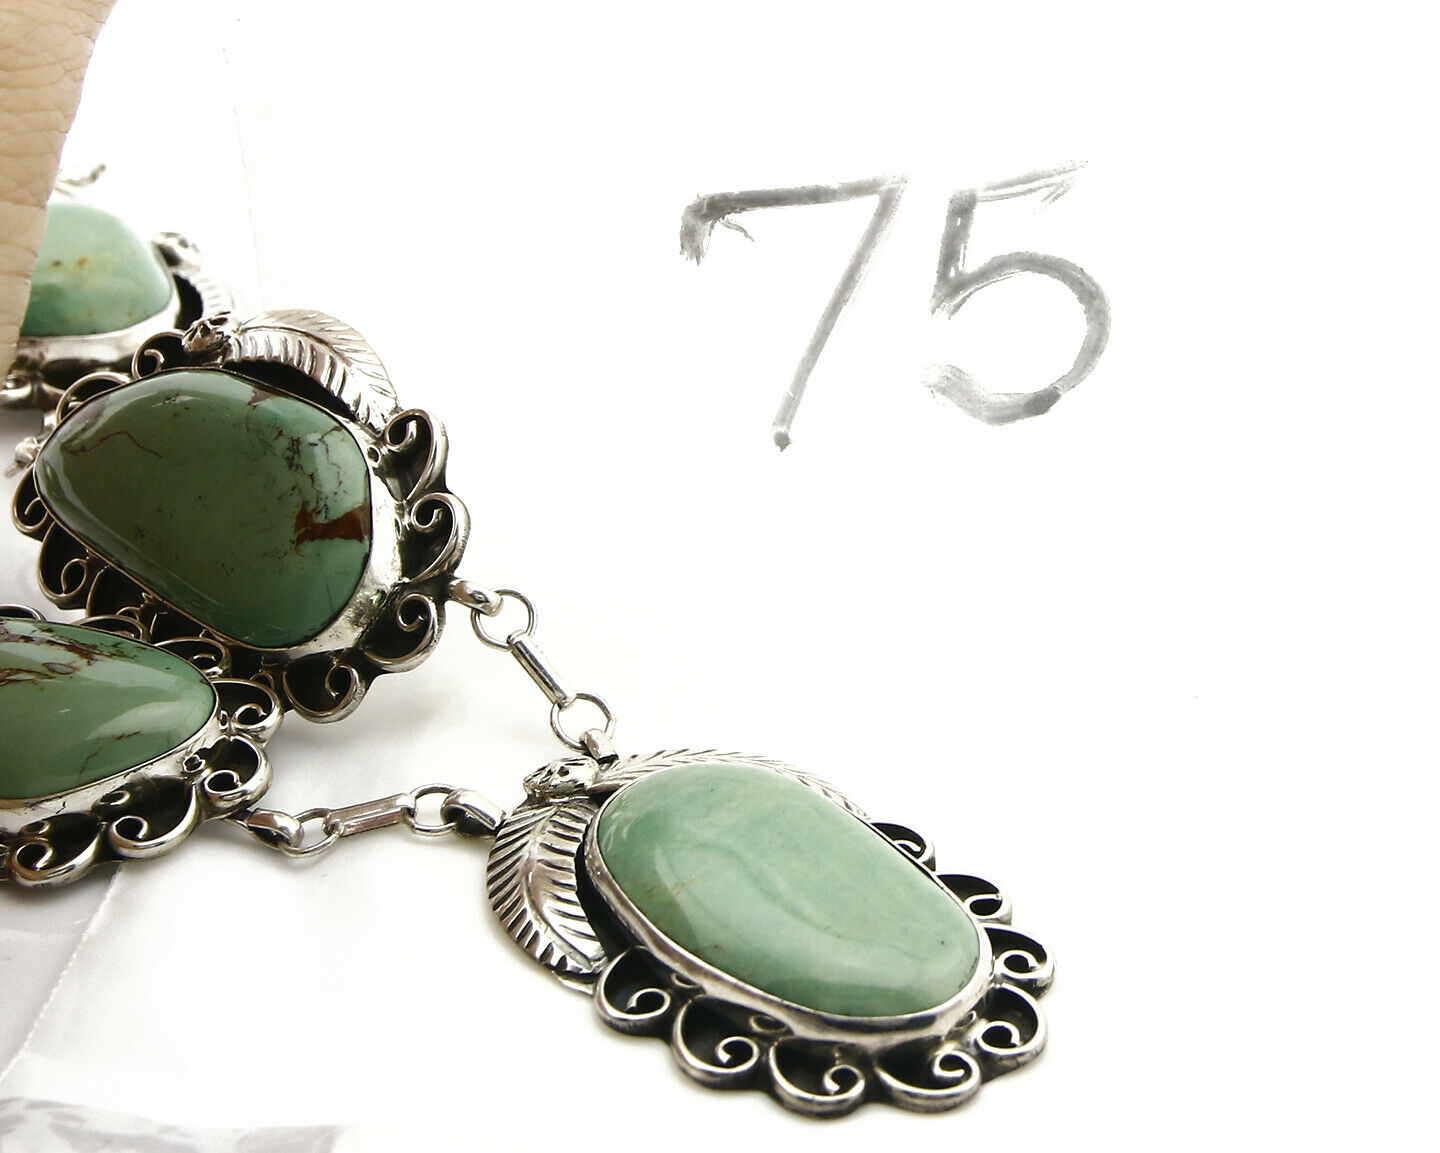 Women's Navajo Necklace .925 Silver Green Turquoise Signed JR